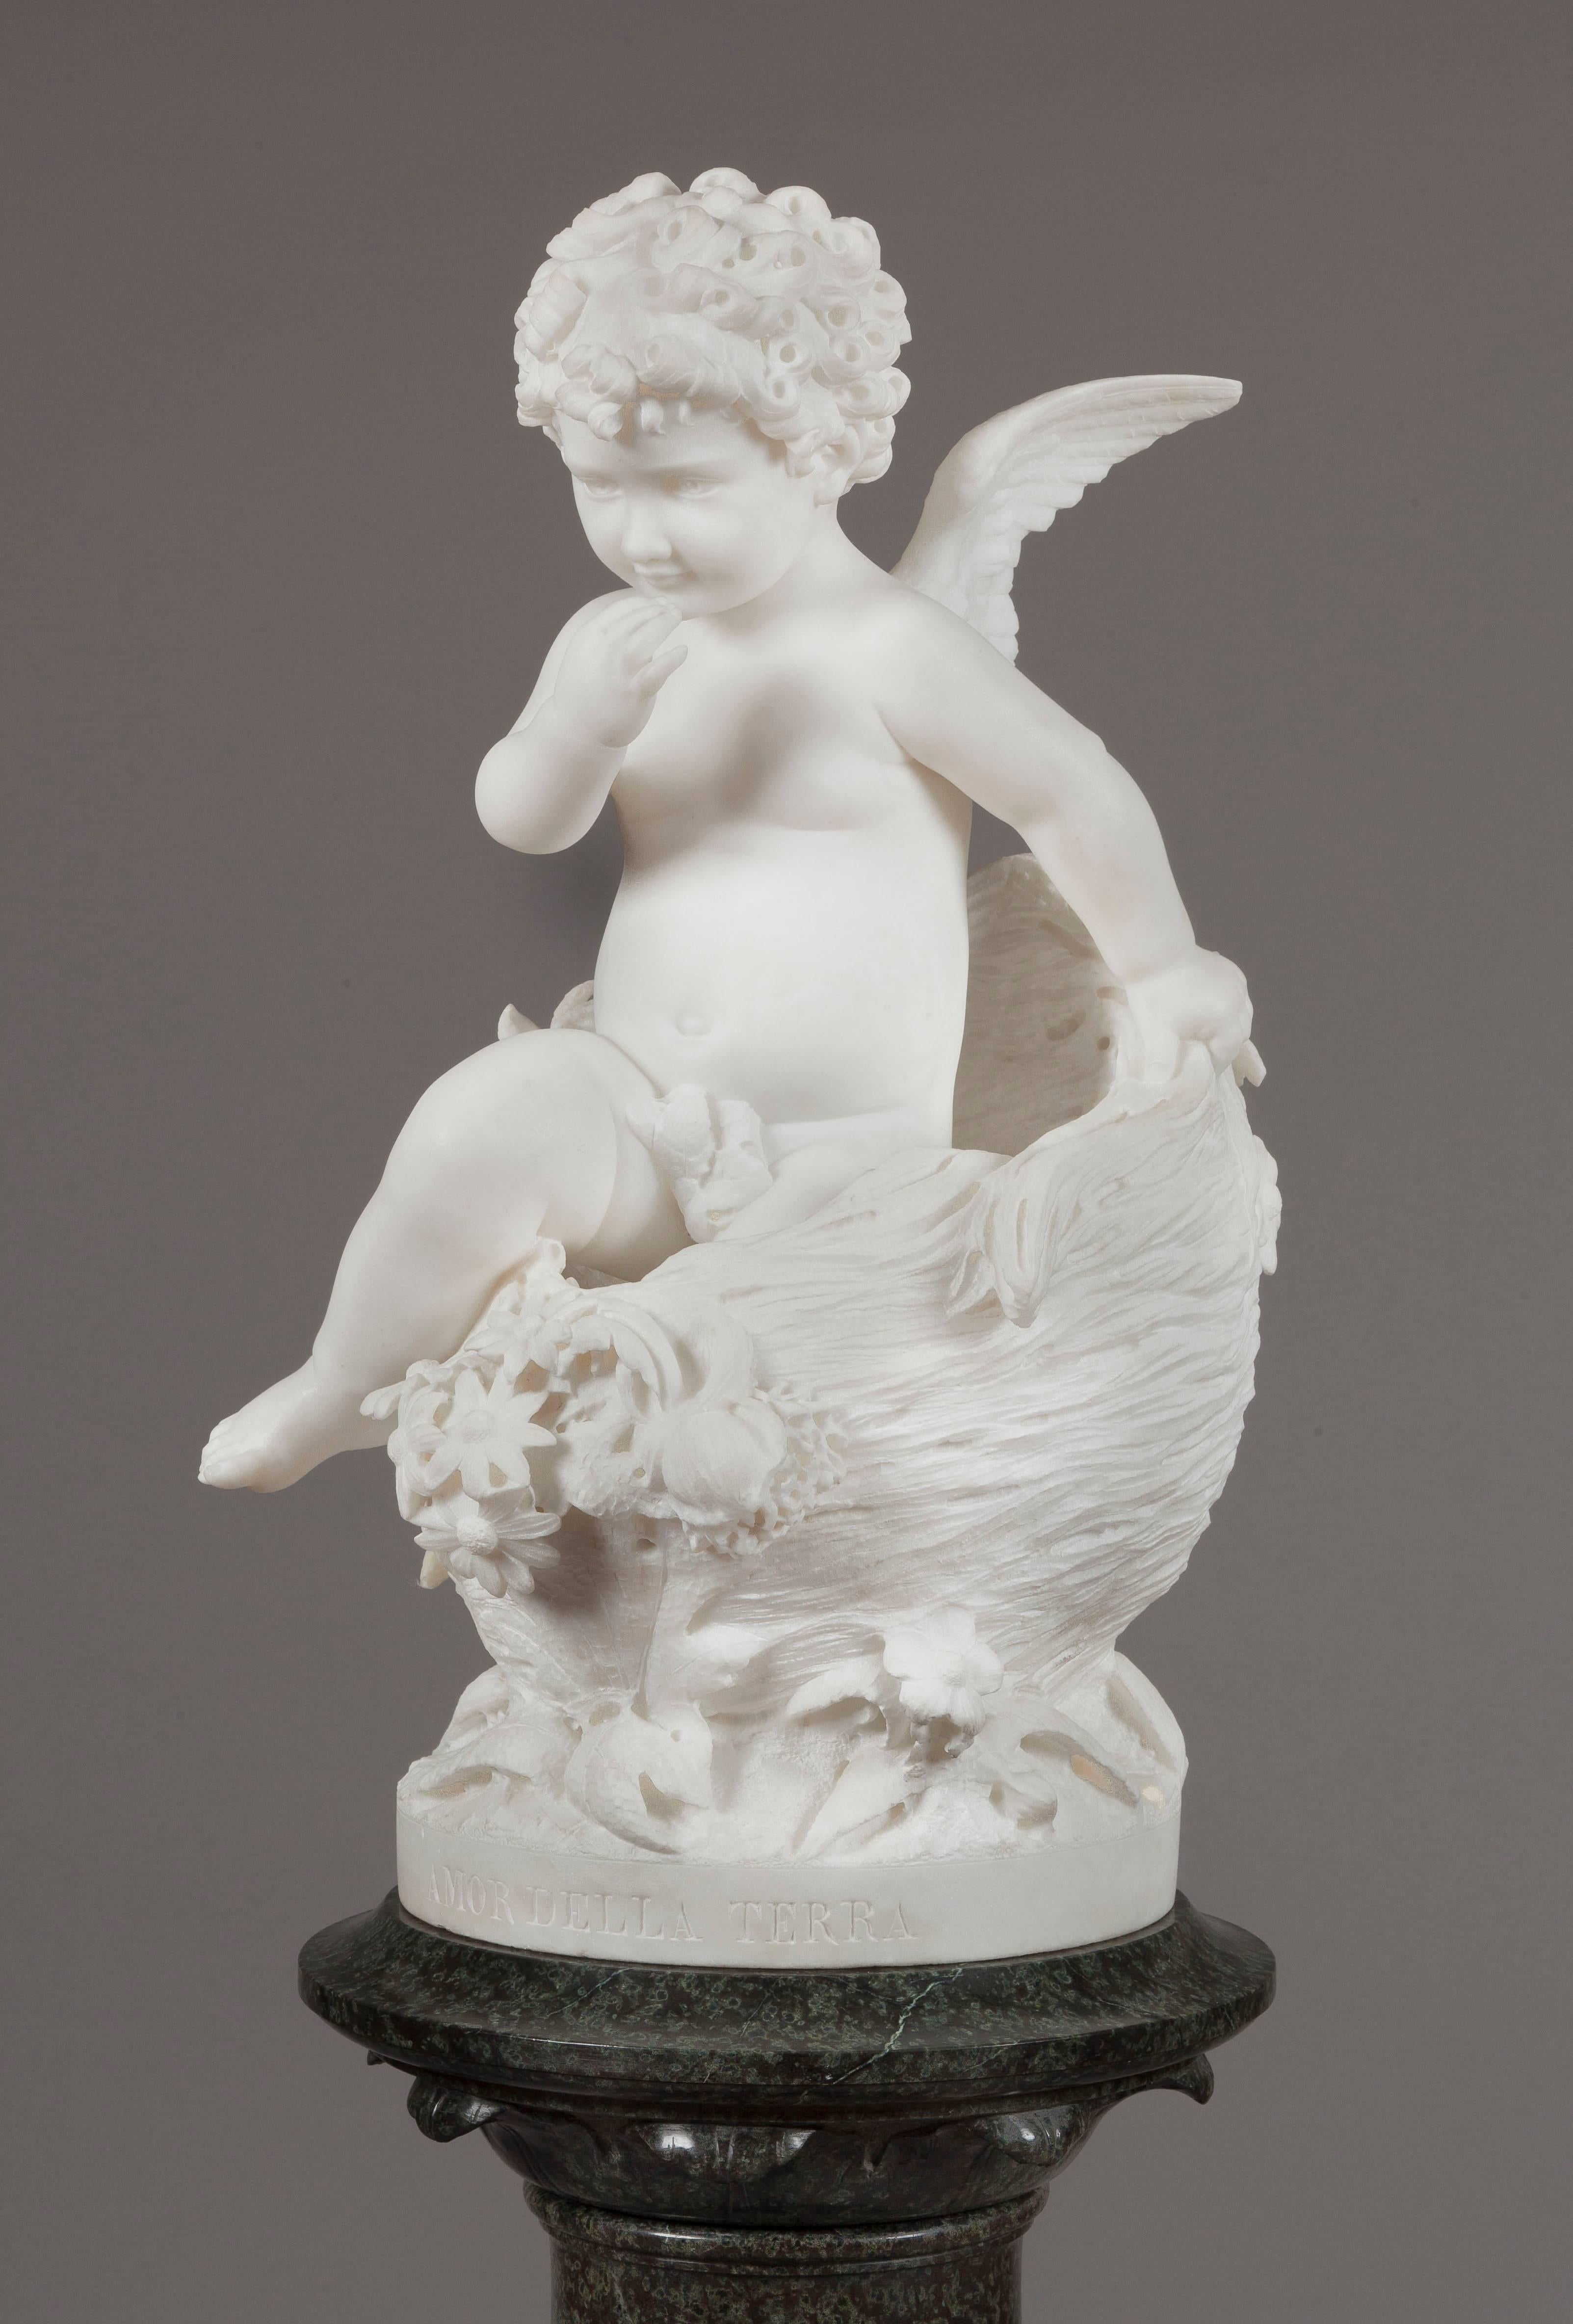 Standing on a turned Verte de Mer circular pedestal, the subject, sculpted in white Carrara marble, the ‘Love of the land’ Cupid emerges from a sylvan cocoon, adorned with foliage and foliates. Entitled to the front, and signed and dated 1885